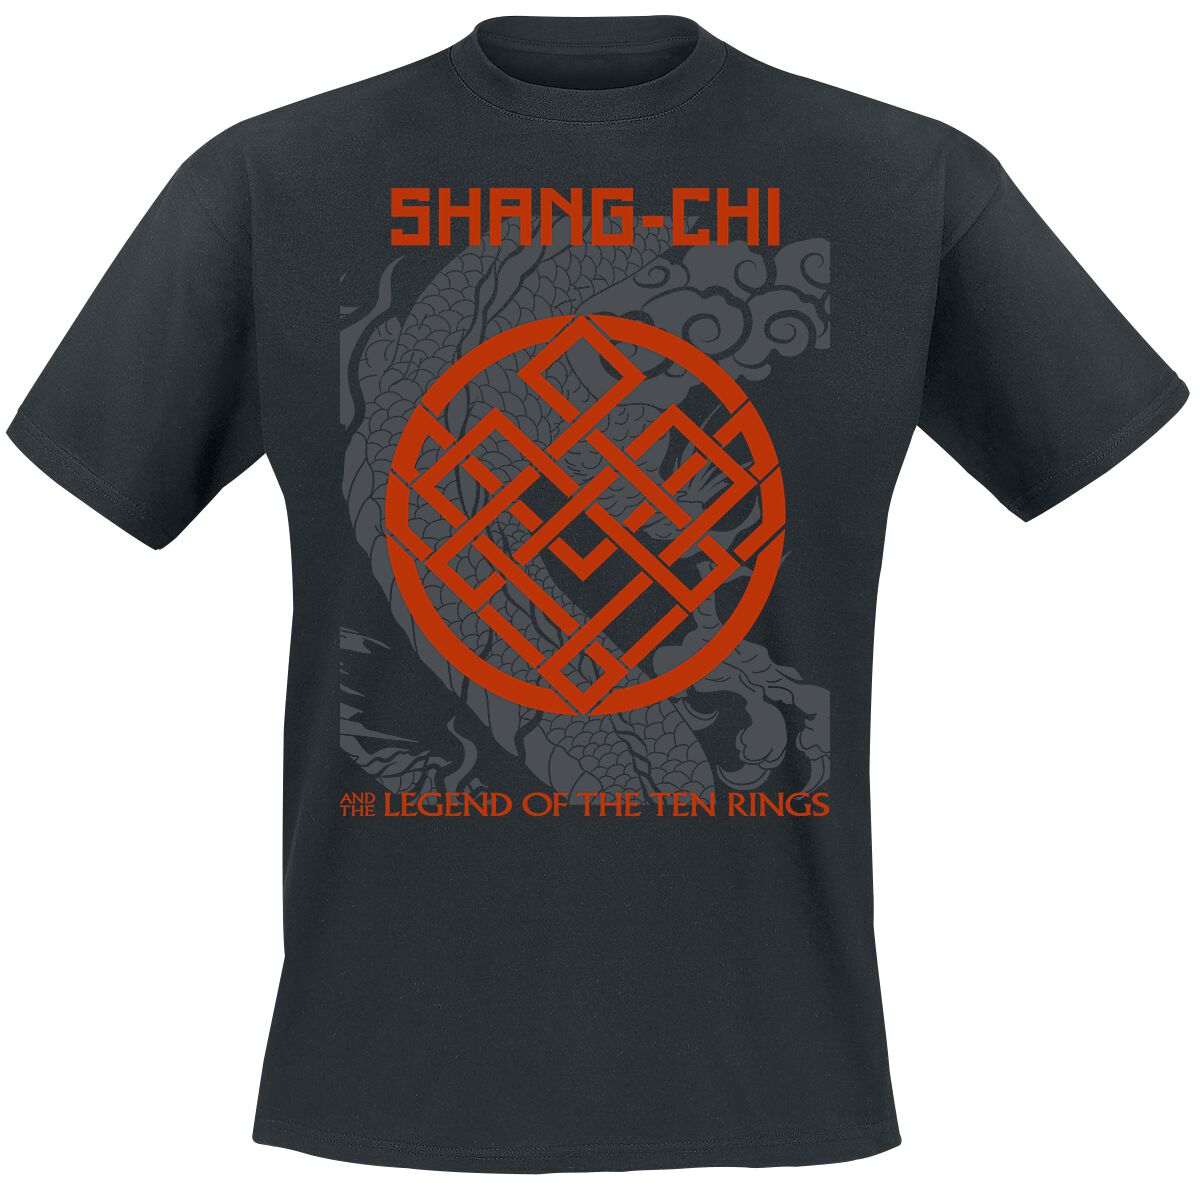 Shang-Chi and the Legend of the Ten Rings Knoten T-Shirt black